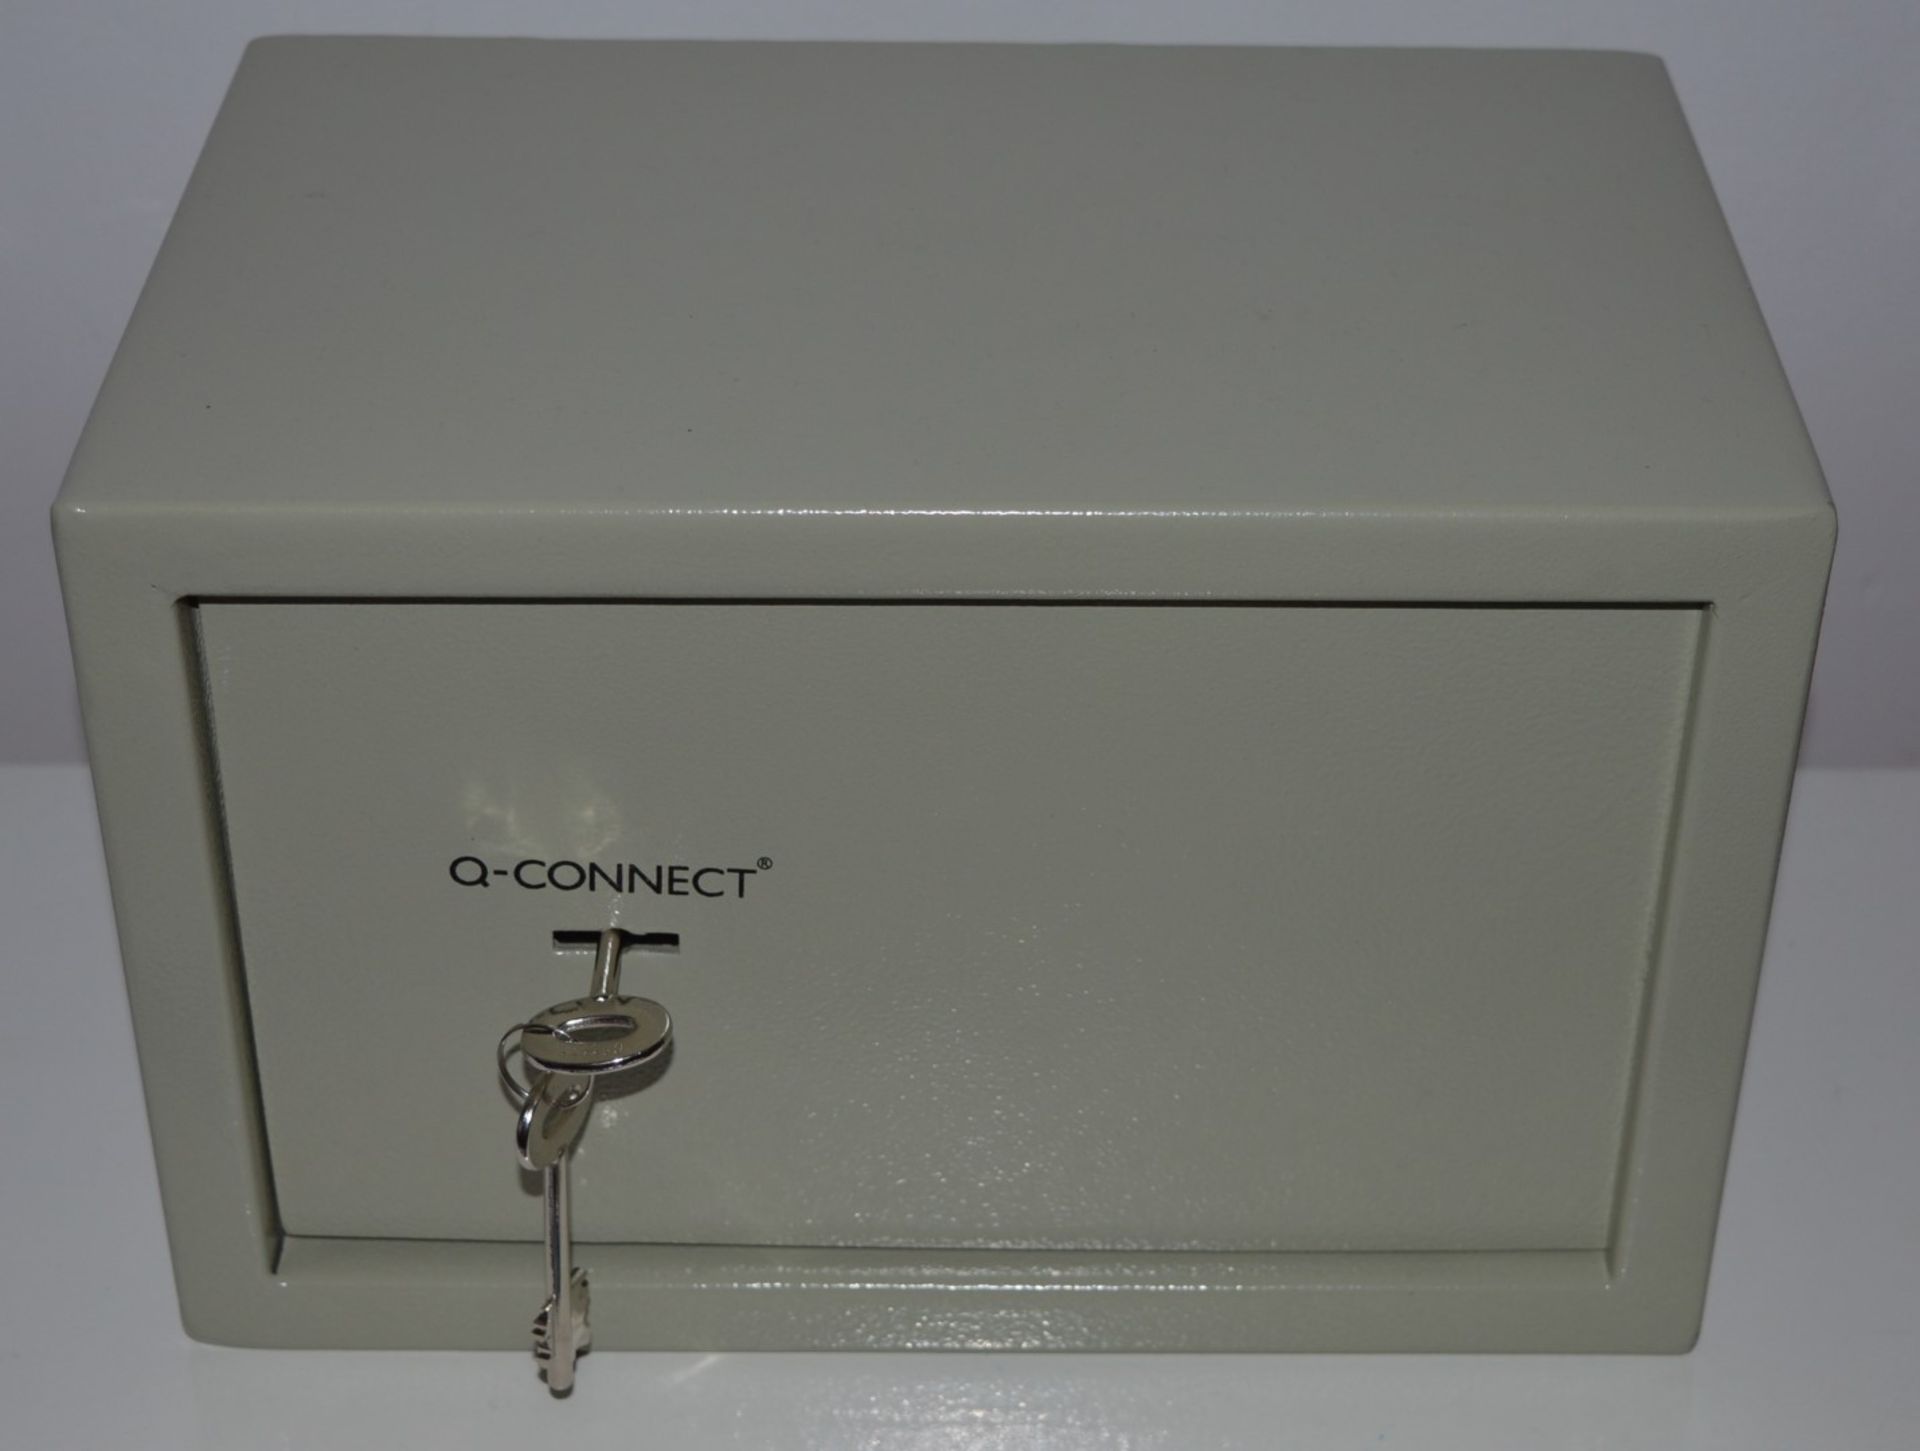 1 x Q-Connect Compact Key Operated Safe - 6 Litre Capacity - H150 x W200 x D200mm - Includes 2